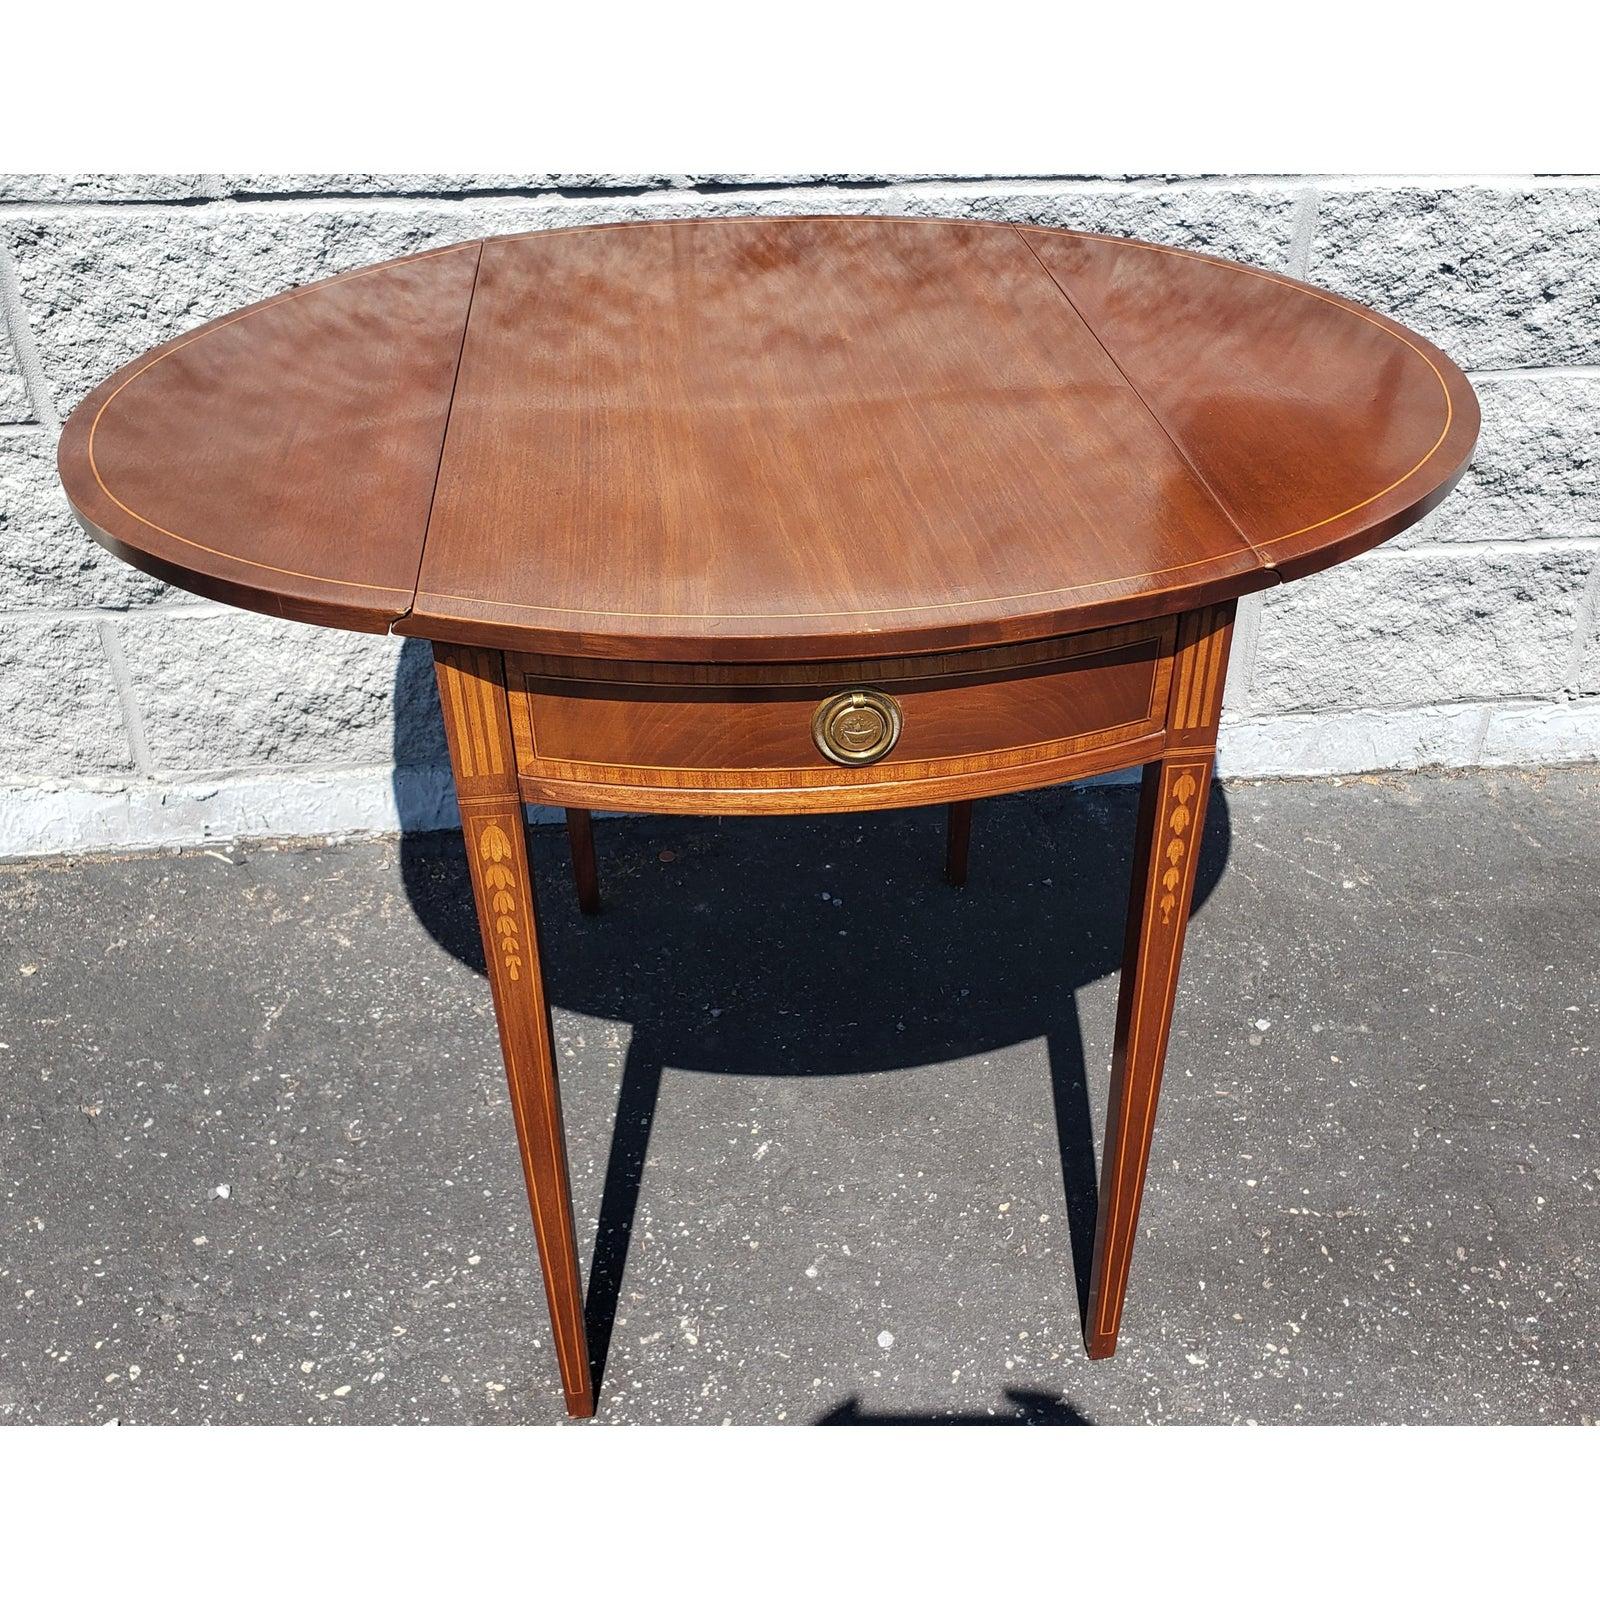 1970s Chippendale Inlaid Mahogany and Satin Wood Drop Leaf Pembroke Table 1